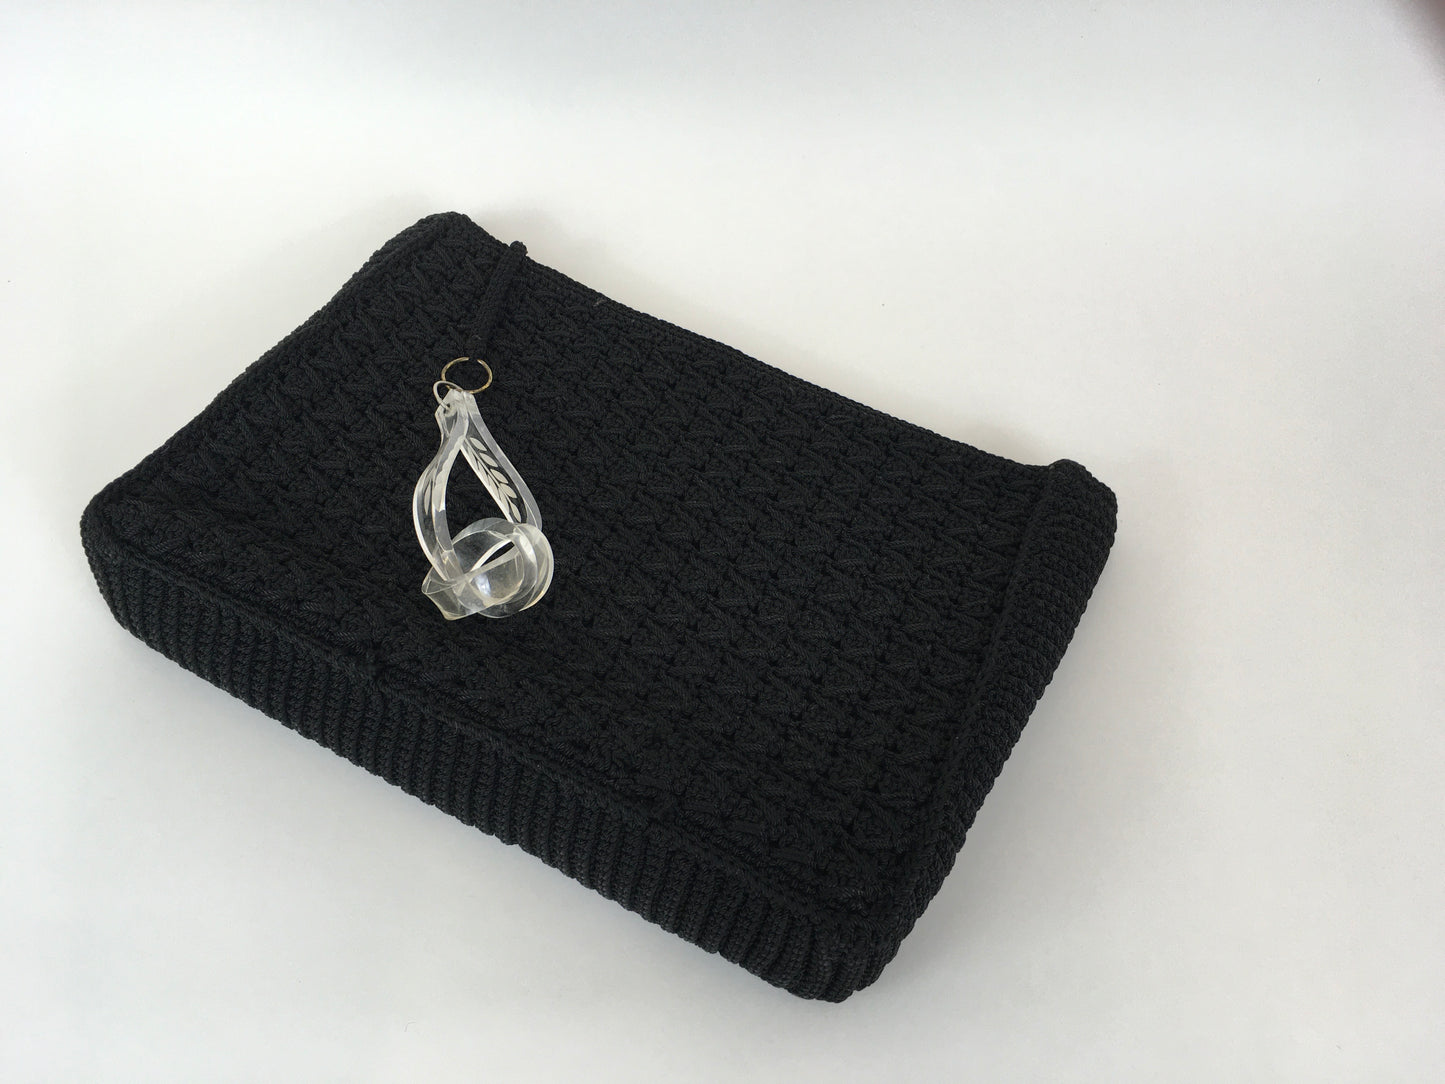 Original 1940’s Beautiful Crochet Clutch Bag in Black - With Large Lucite Pull